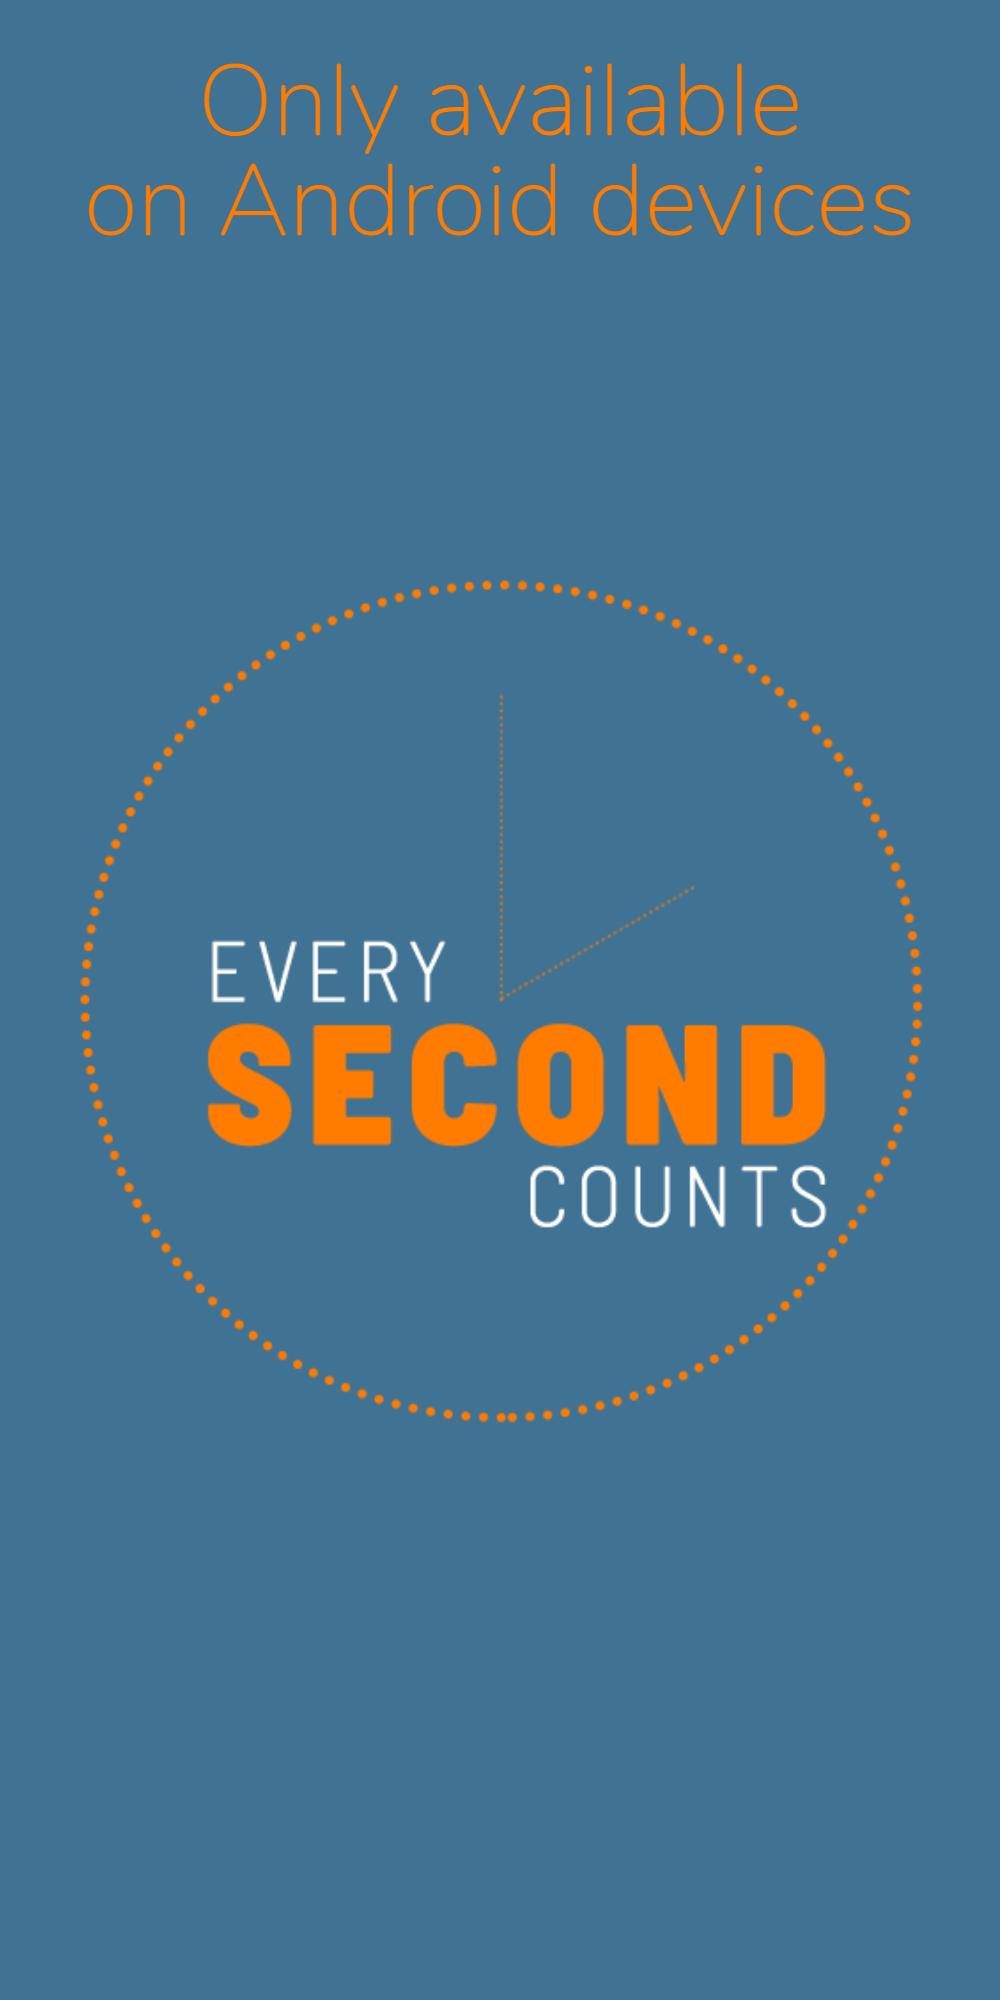 Second count. Every second counts.